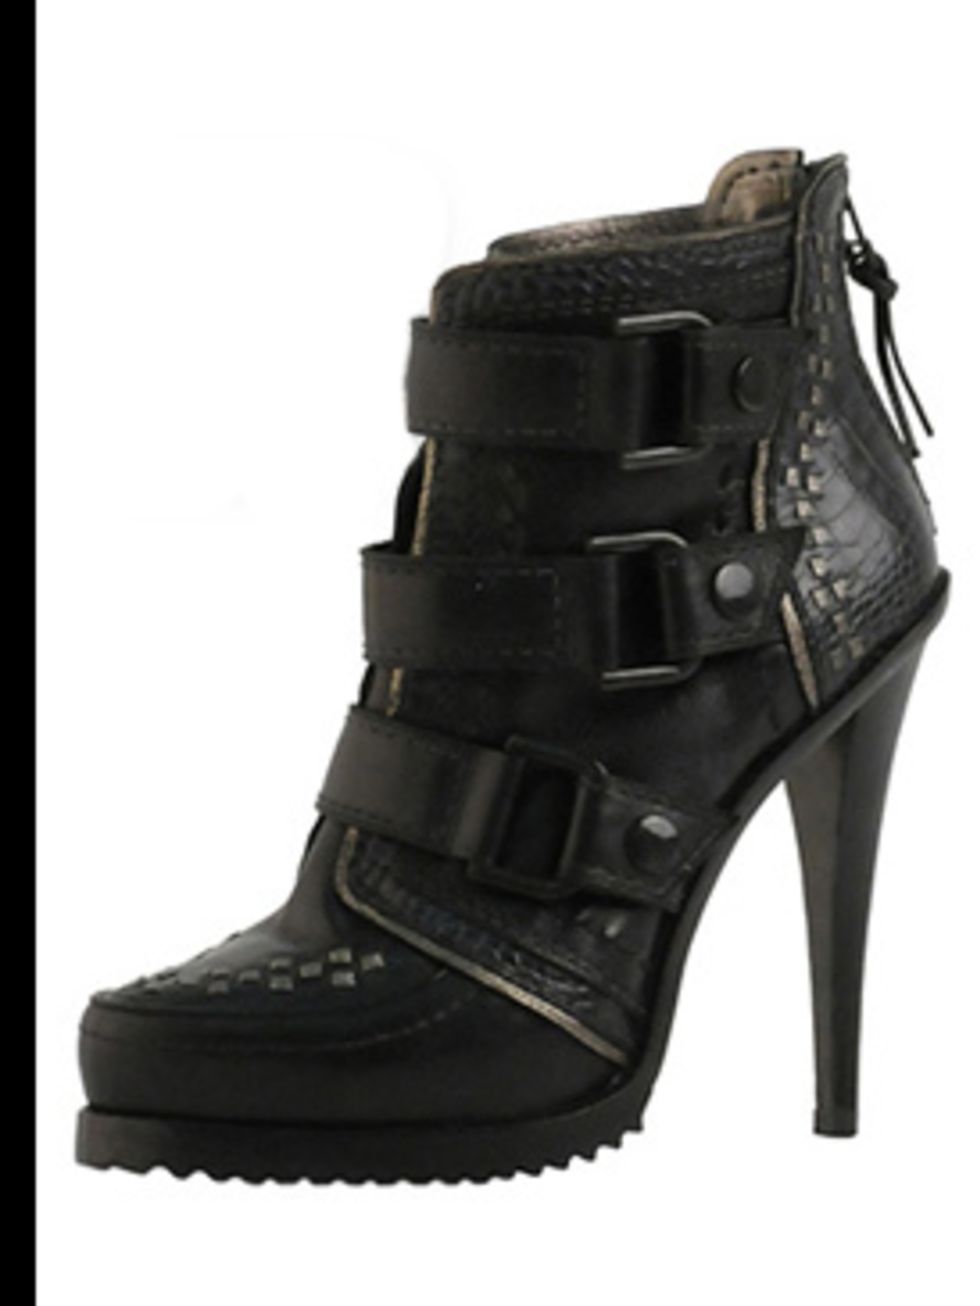 <p>Boots, £150 by<a href="http://xml.riverisland.com/flash/content.php"> River Island</a></p>